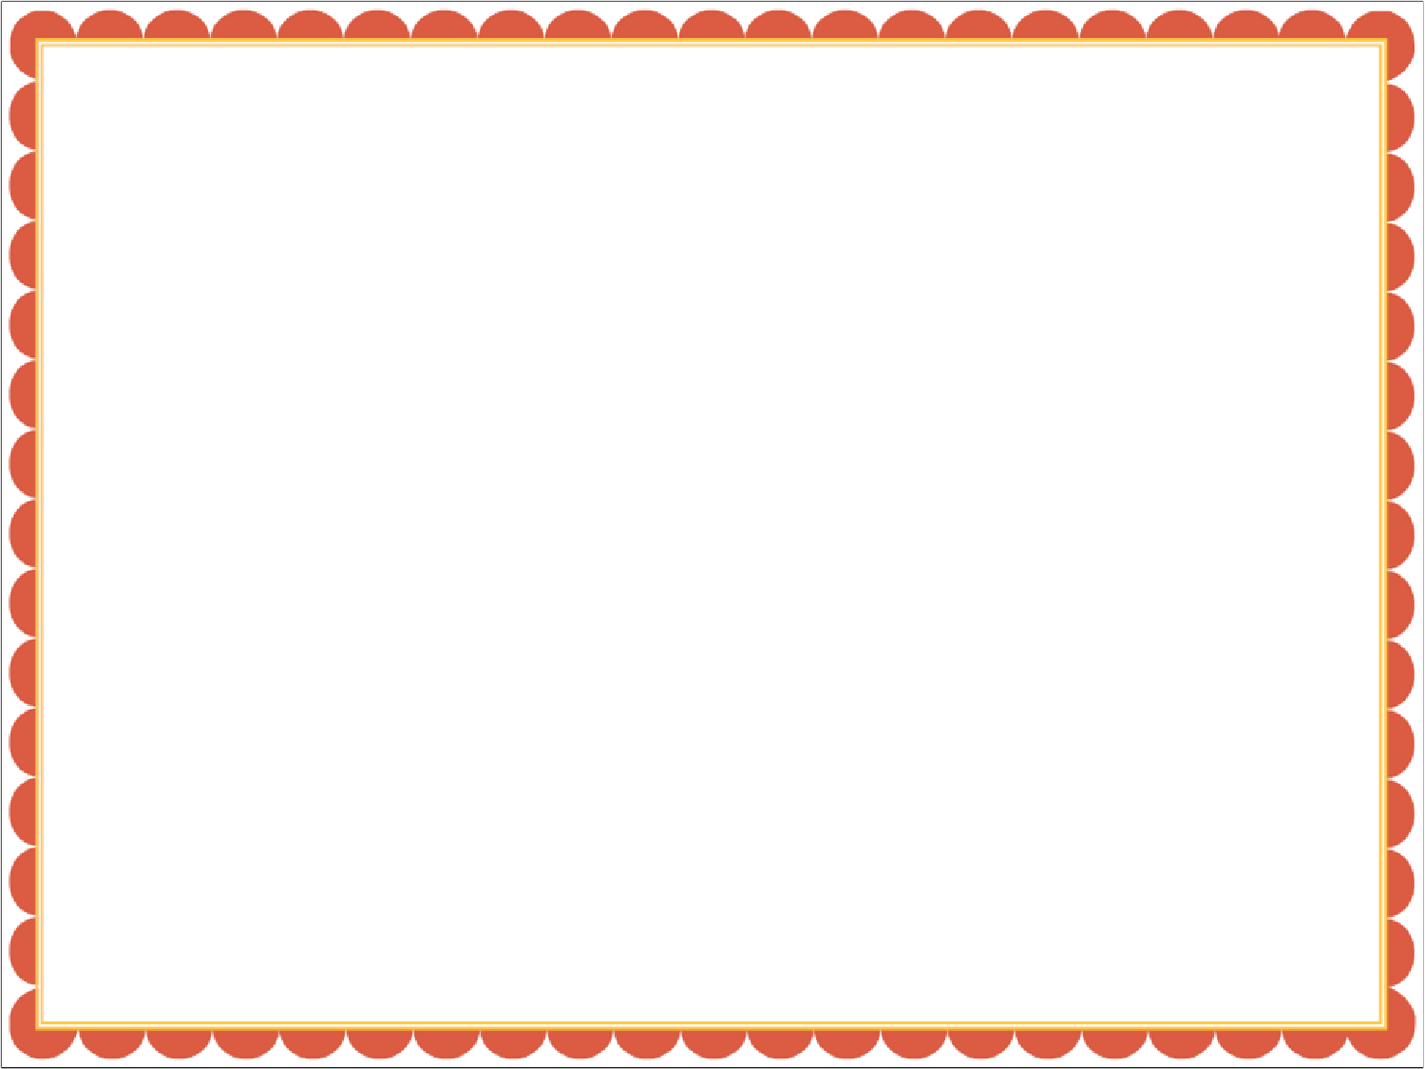 Certificate Borders Templates Free Clipart - Free to use Clip Art ...